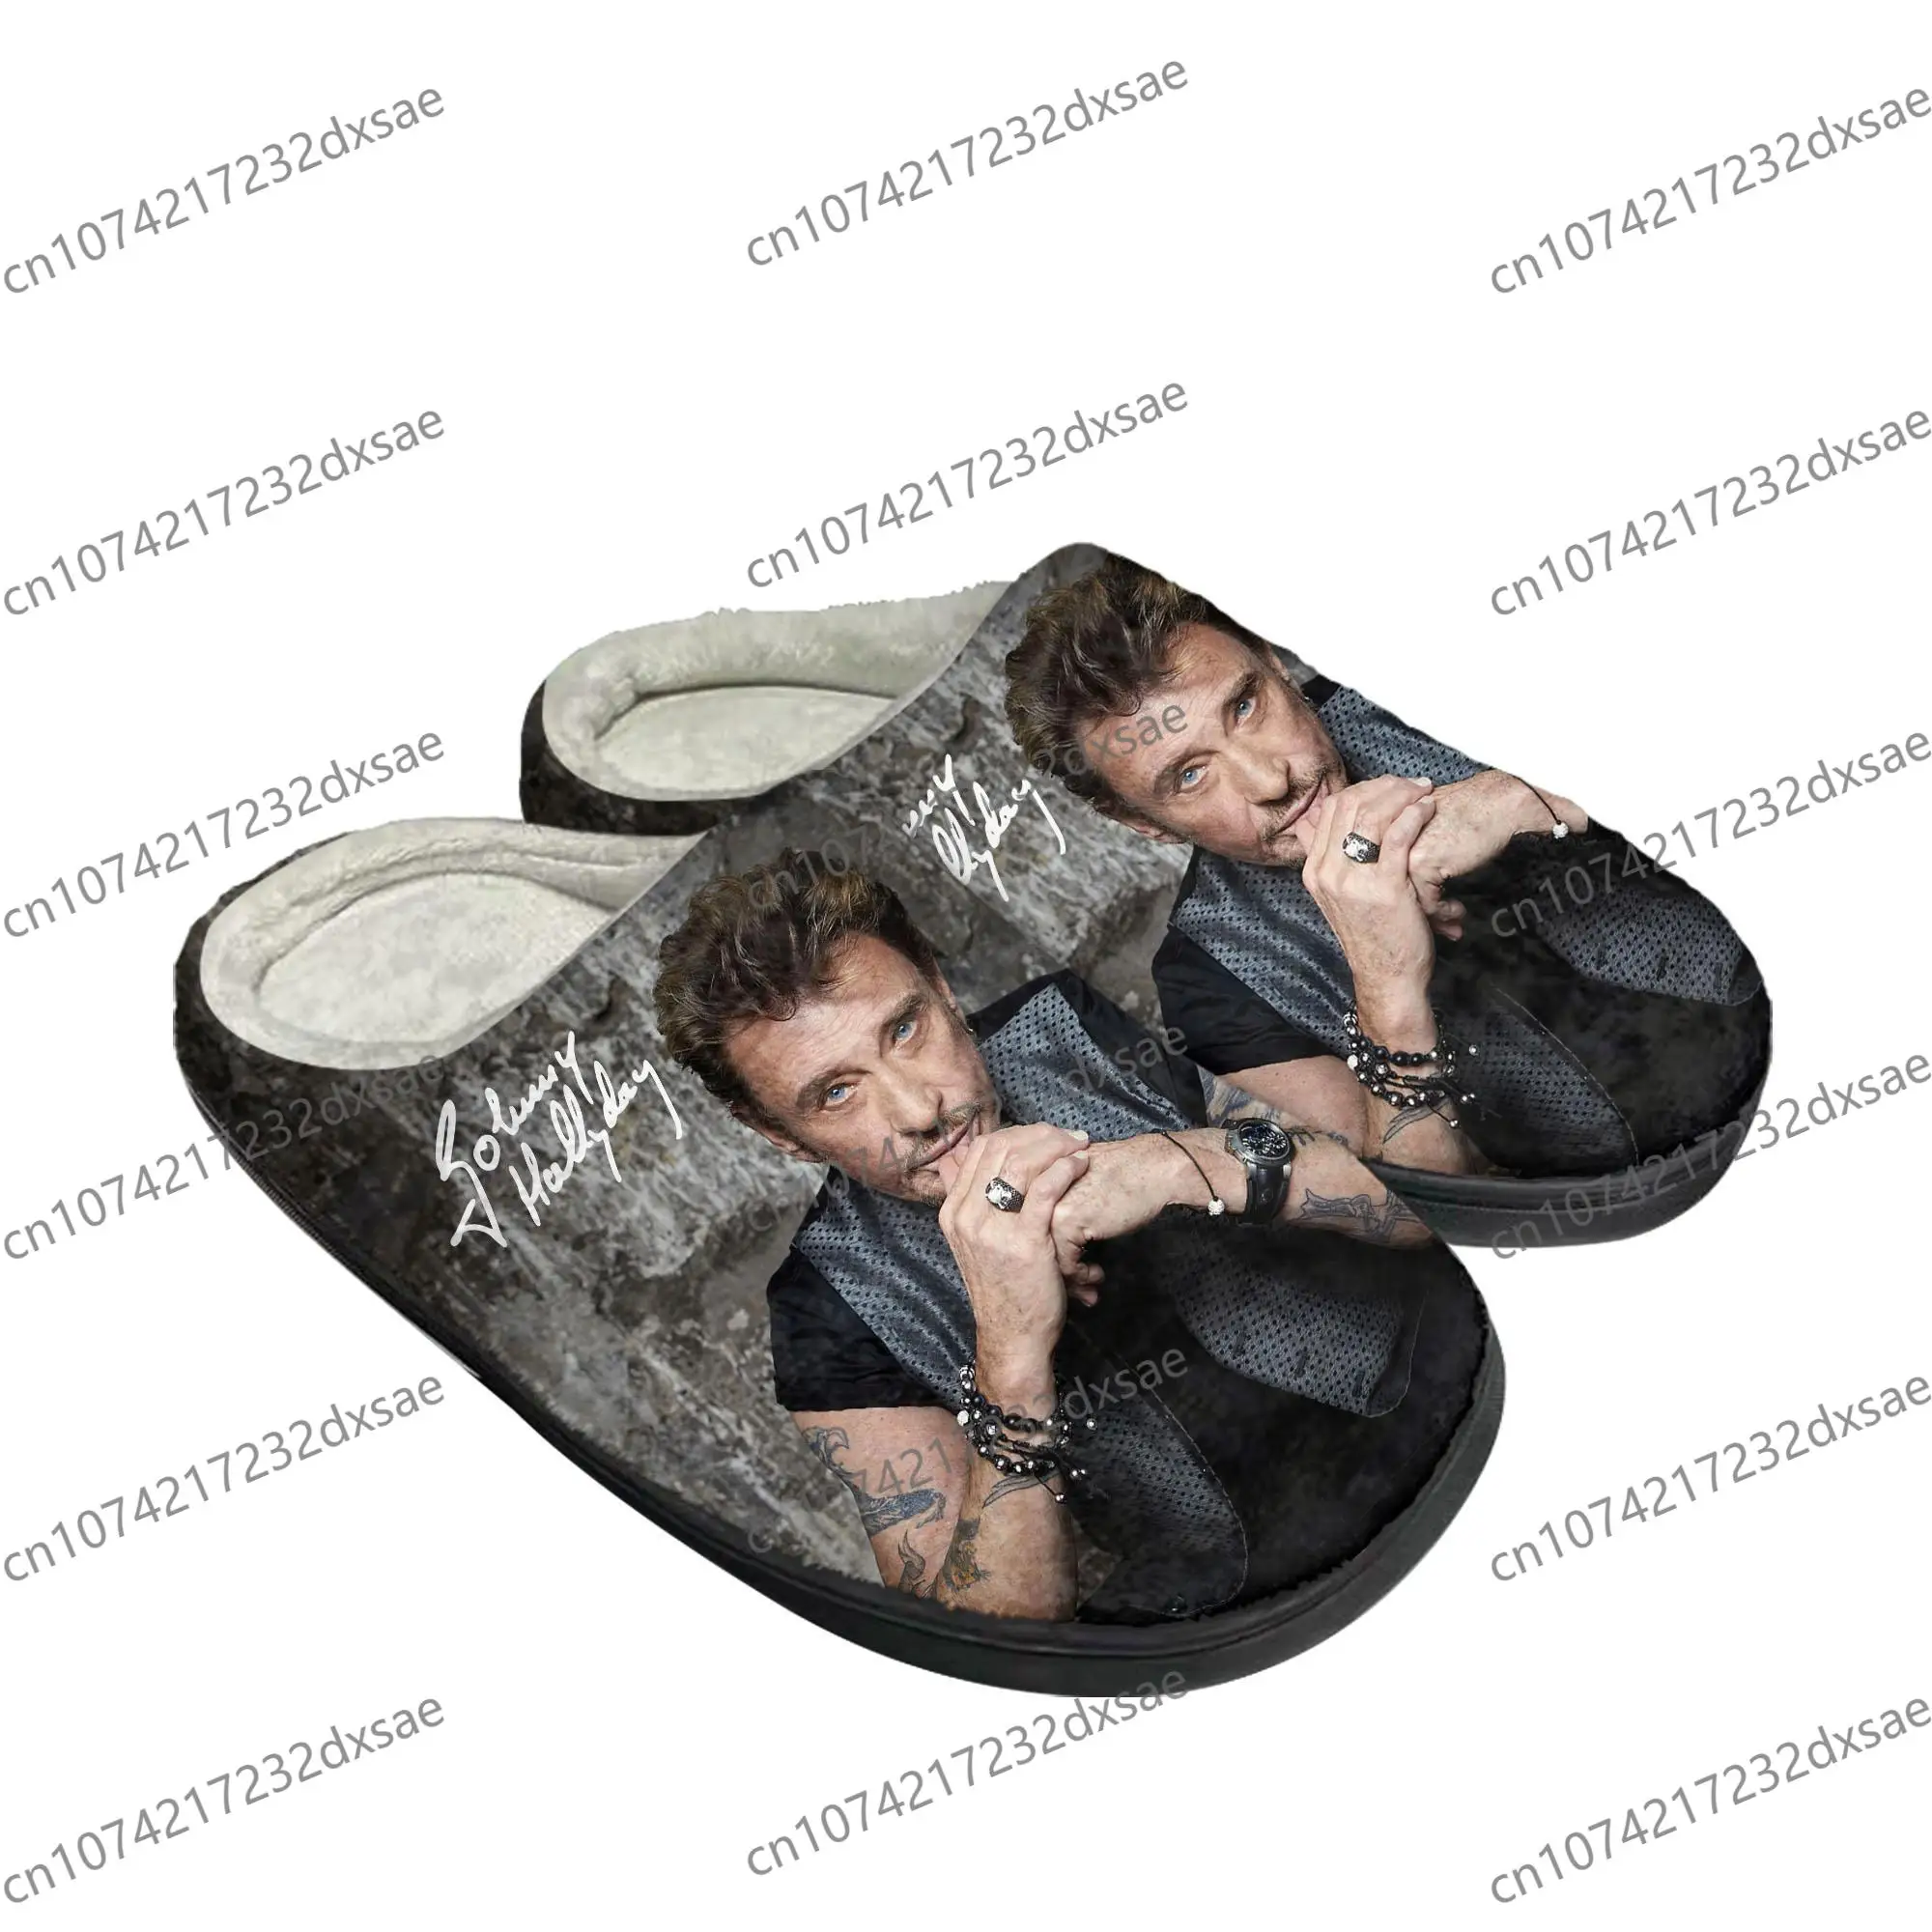 

Johnny Hallyday Rock Singer Home Cotton Custom Slippers Mens Womens Boys Sandals Bedroom Casual Keep Warm Shoes Thermal Slipper